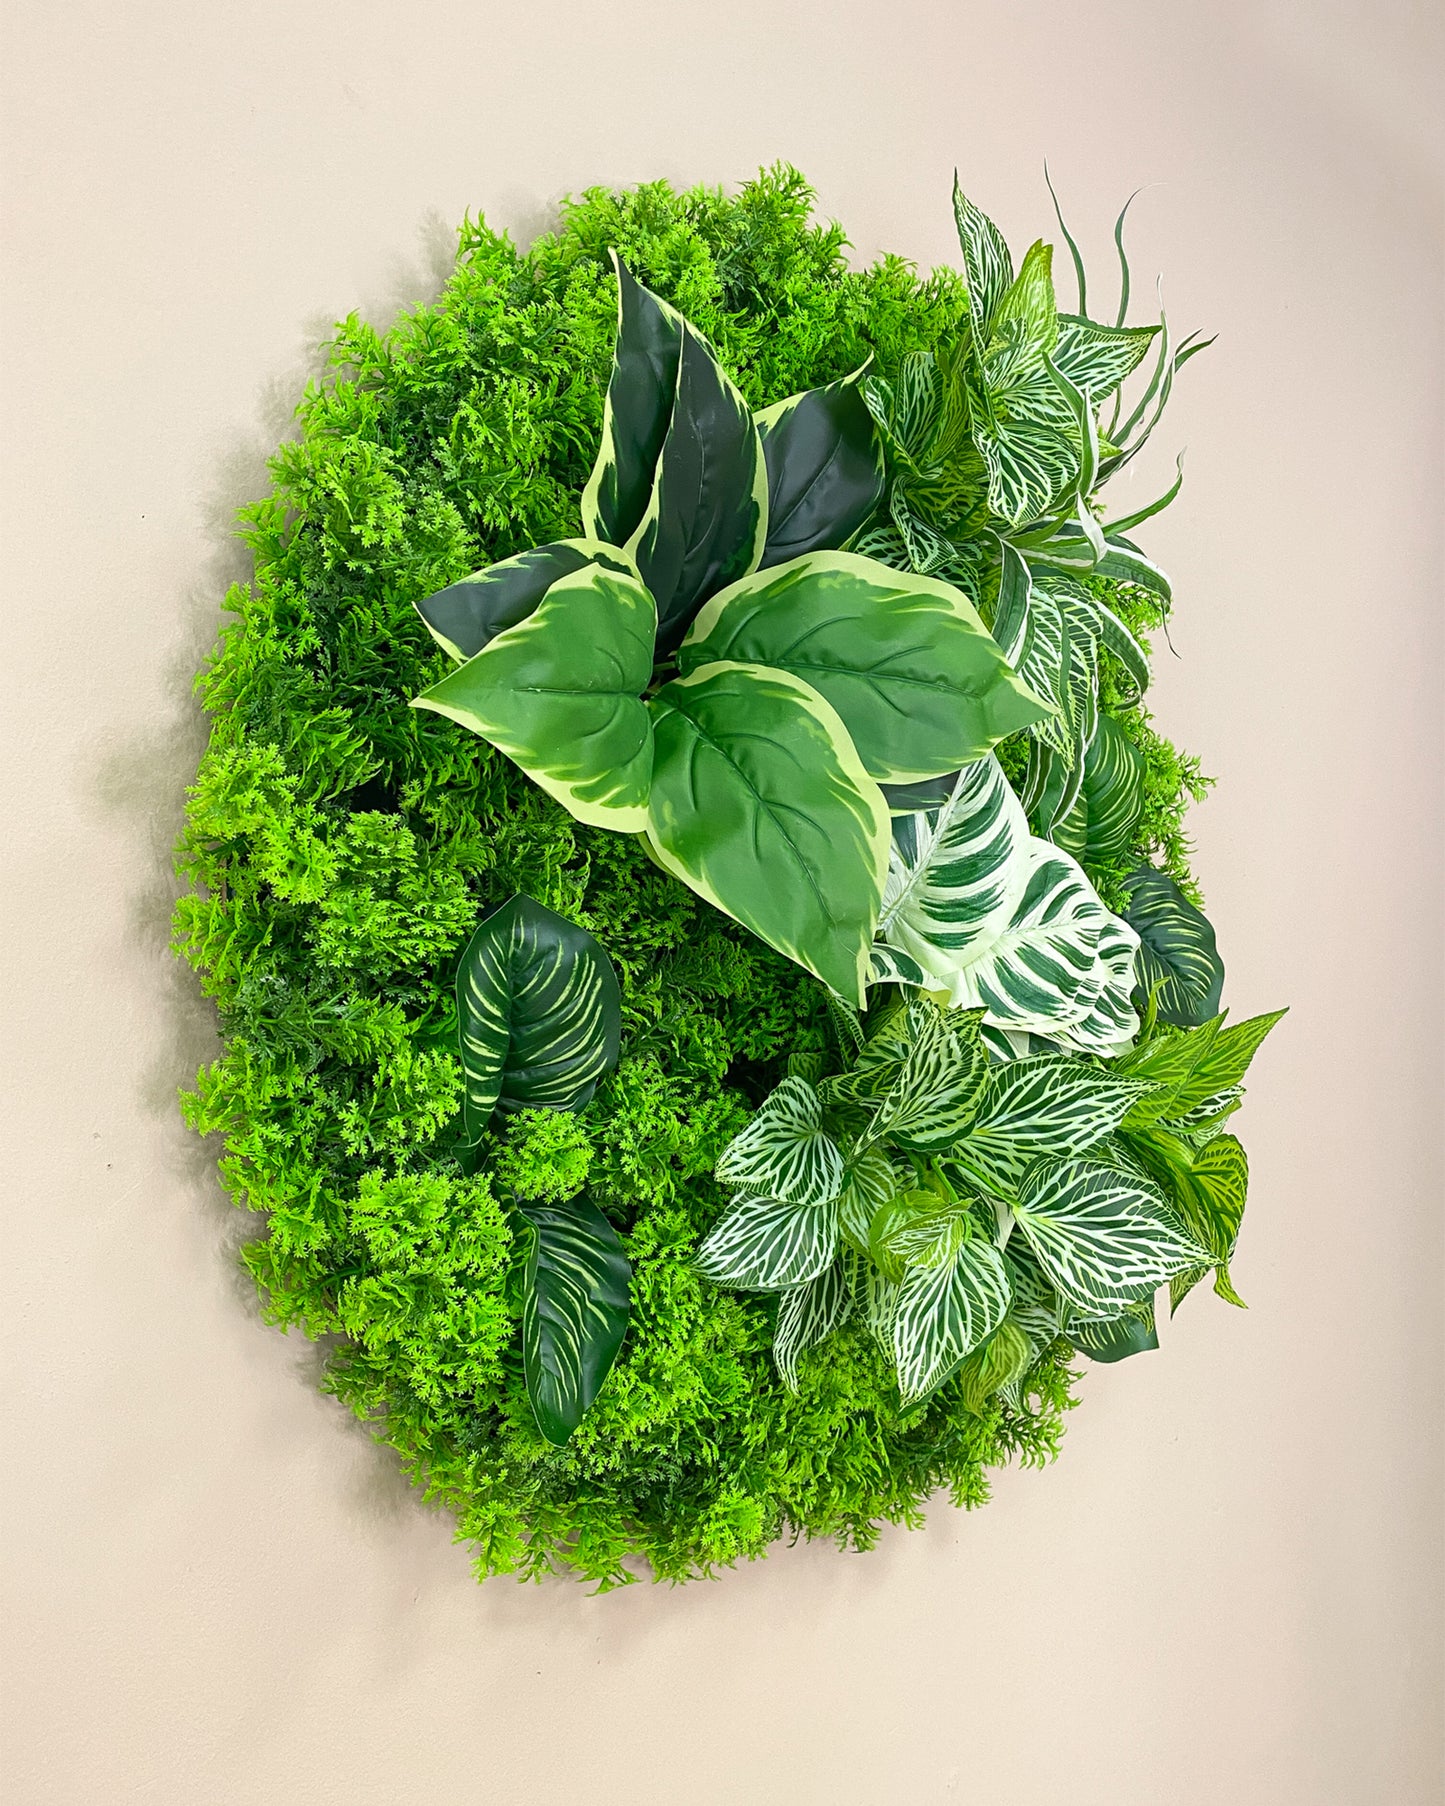 Plant Sphere/Plant Wall "Thalassa" made of Realtouch artificial plants